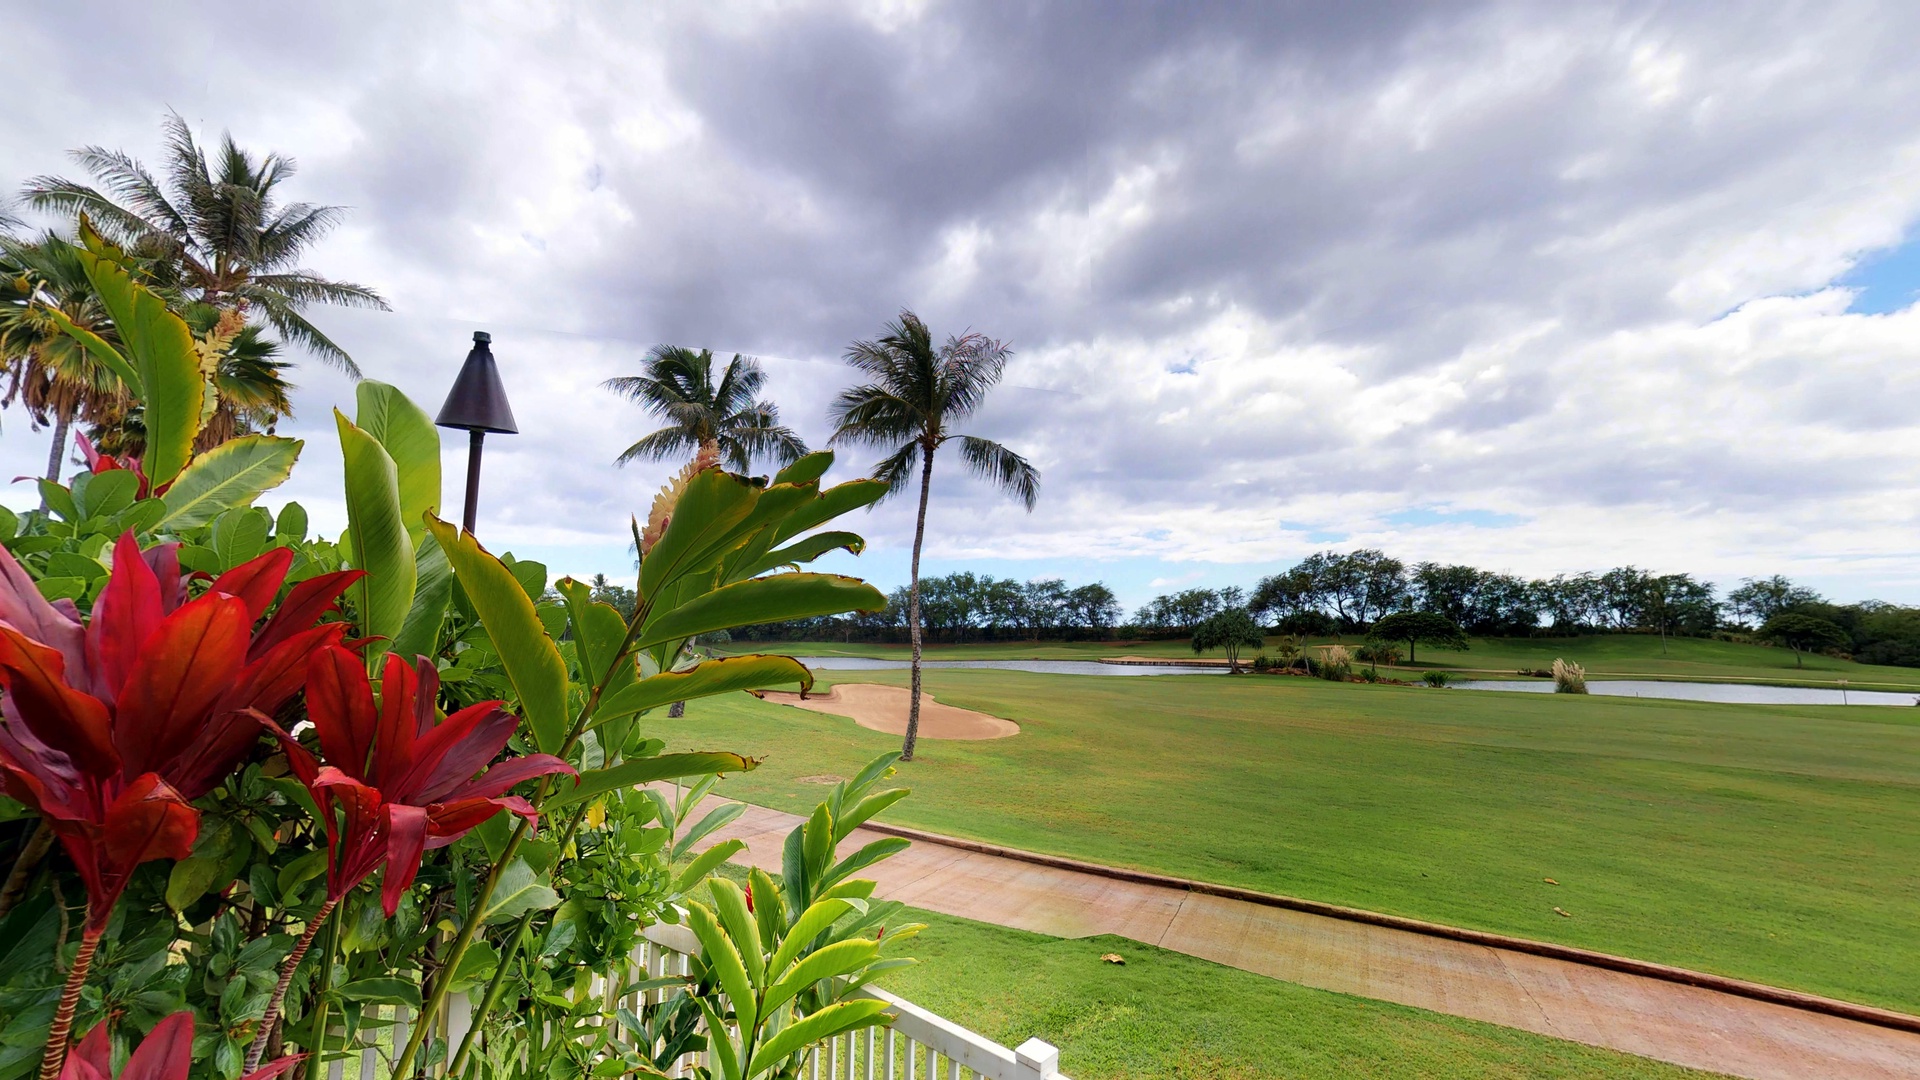 Kapolei Vacation Rentals, Fairways at Ko Olina 22H - An island day with a view of the manicured golf course.